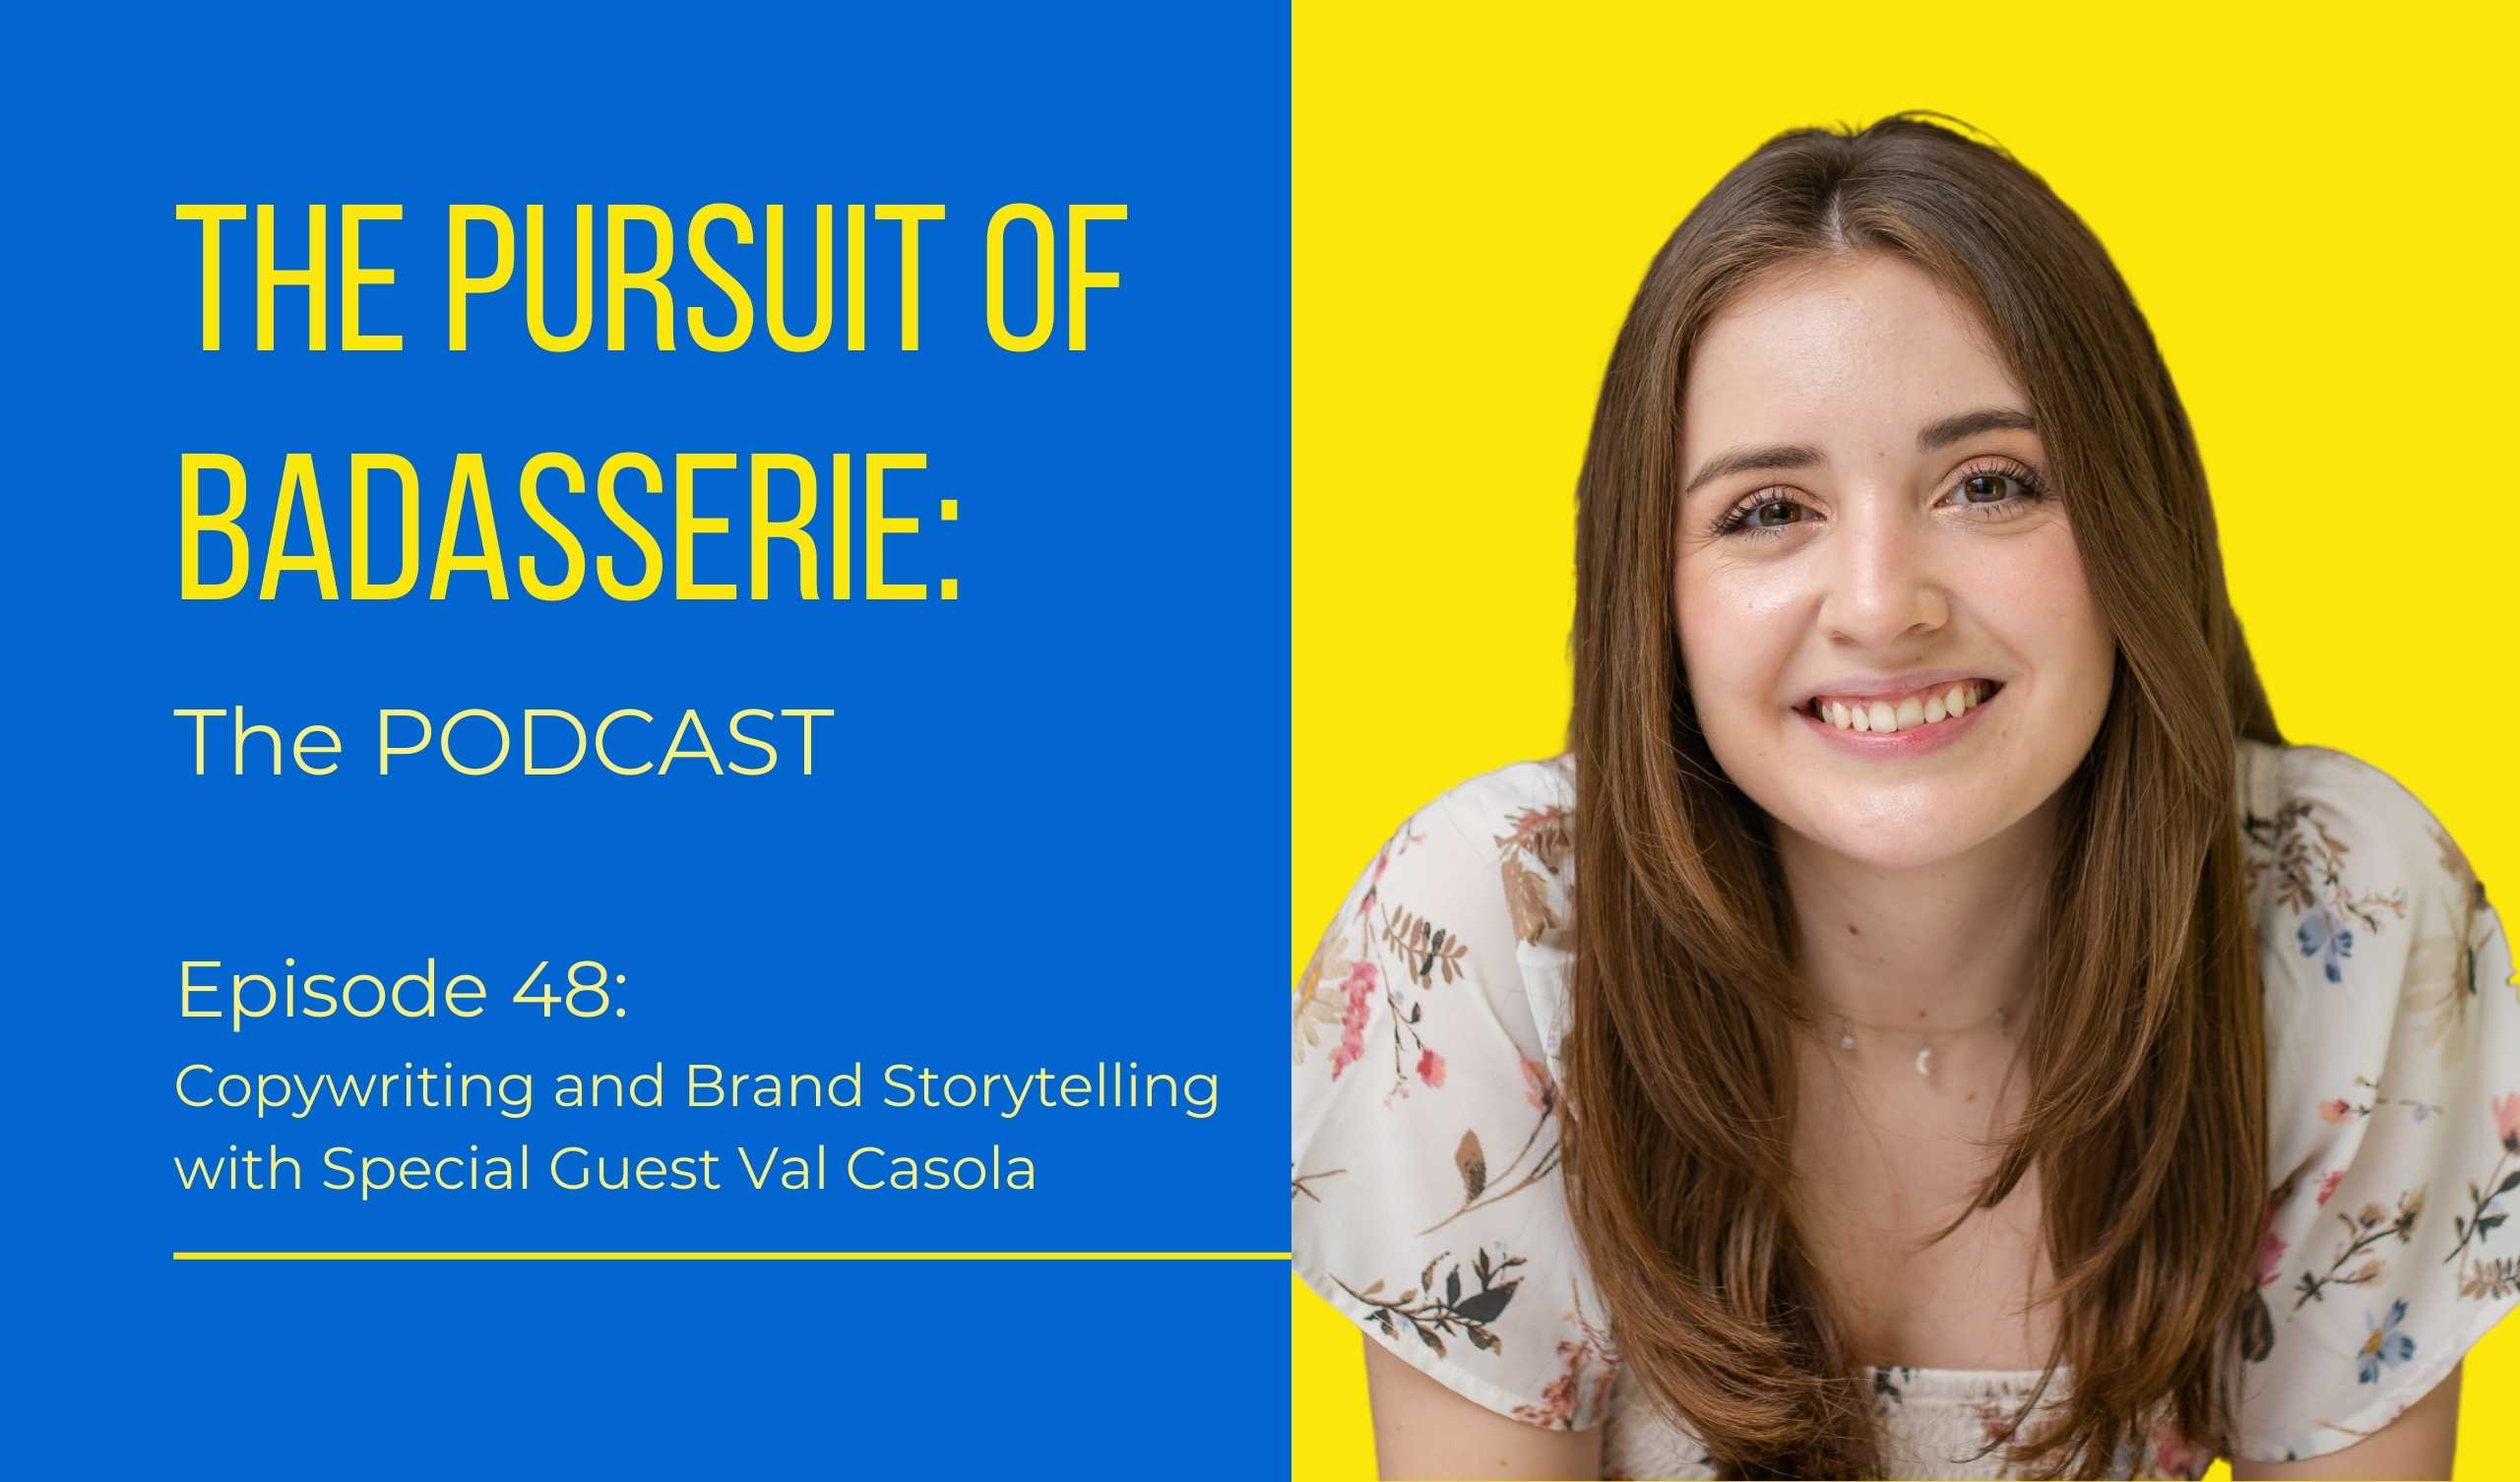 The Pursuit of Badasserie: The Podcast, Copywriting and Brand Storytelling with Val Casola